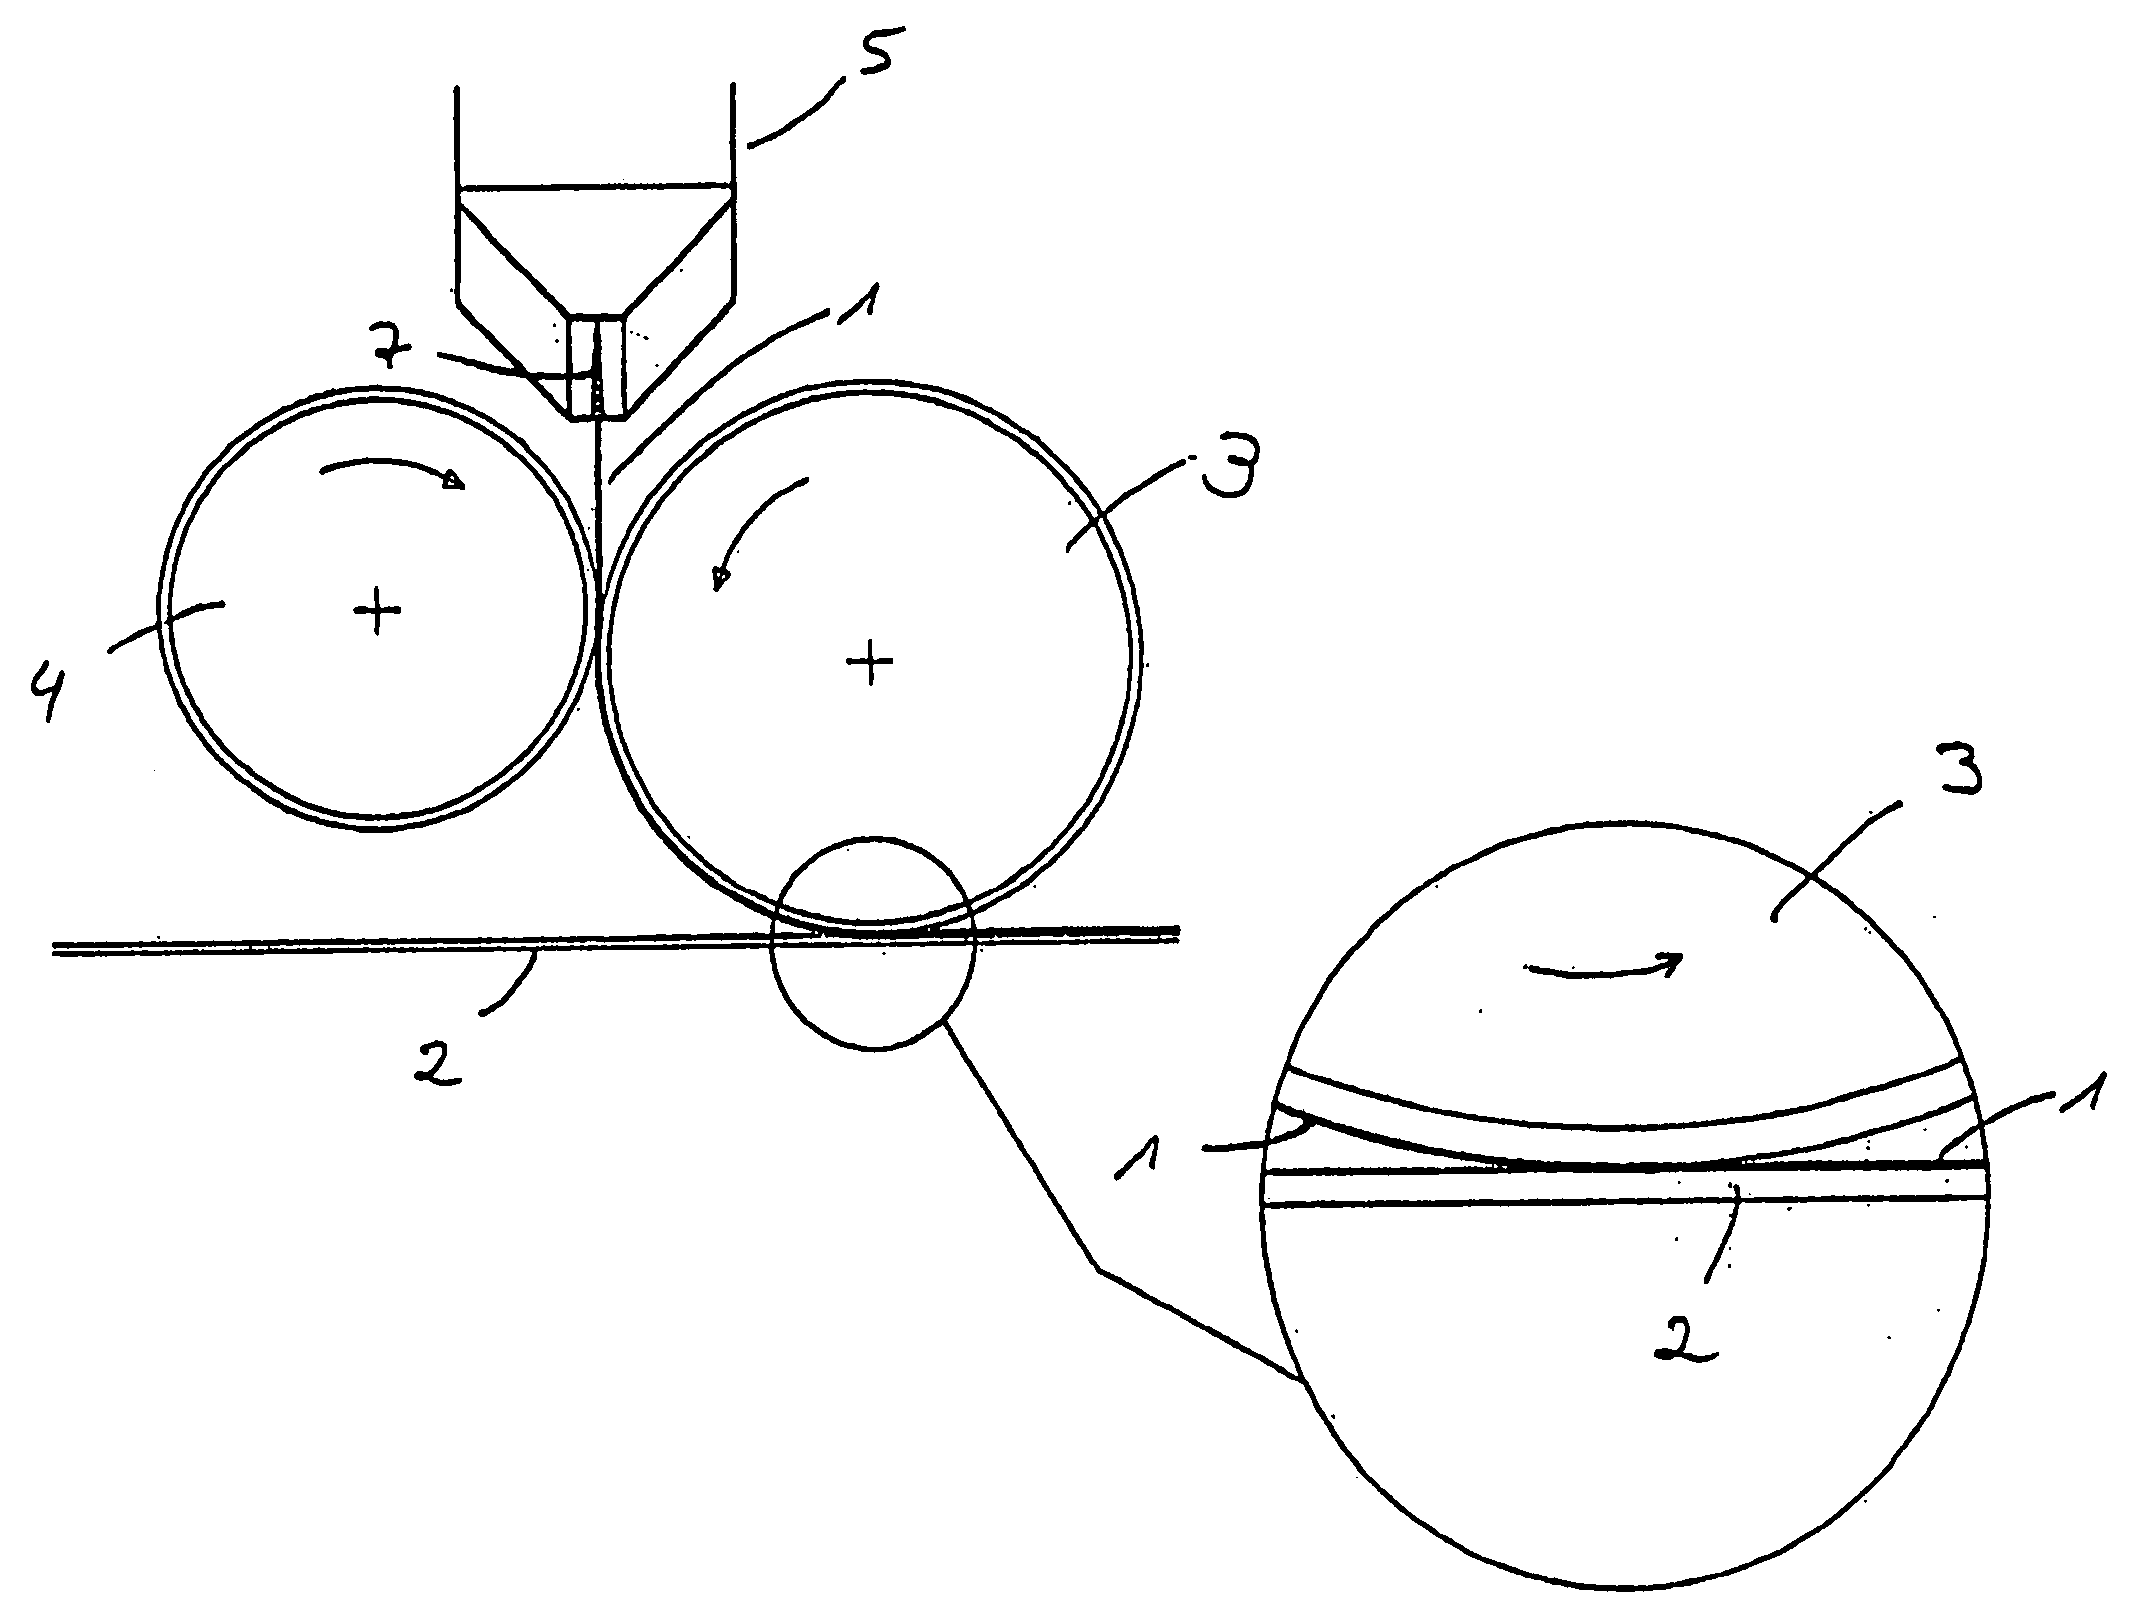 Device for applying a suspension onto a base plate